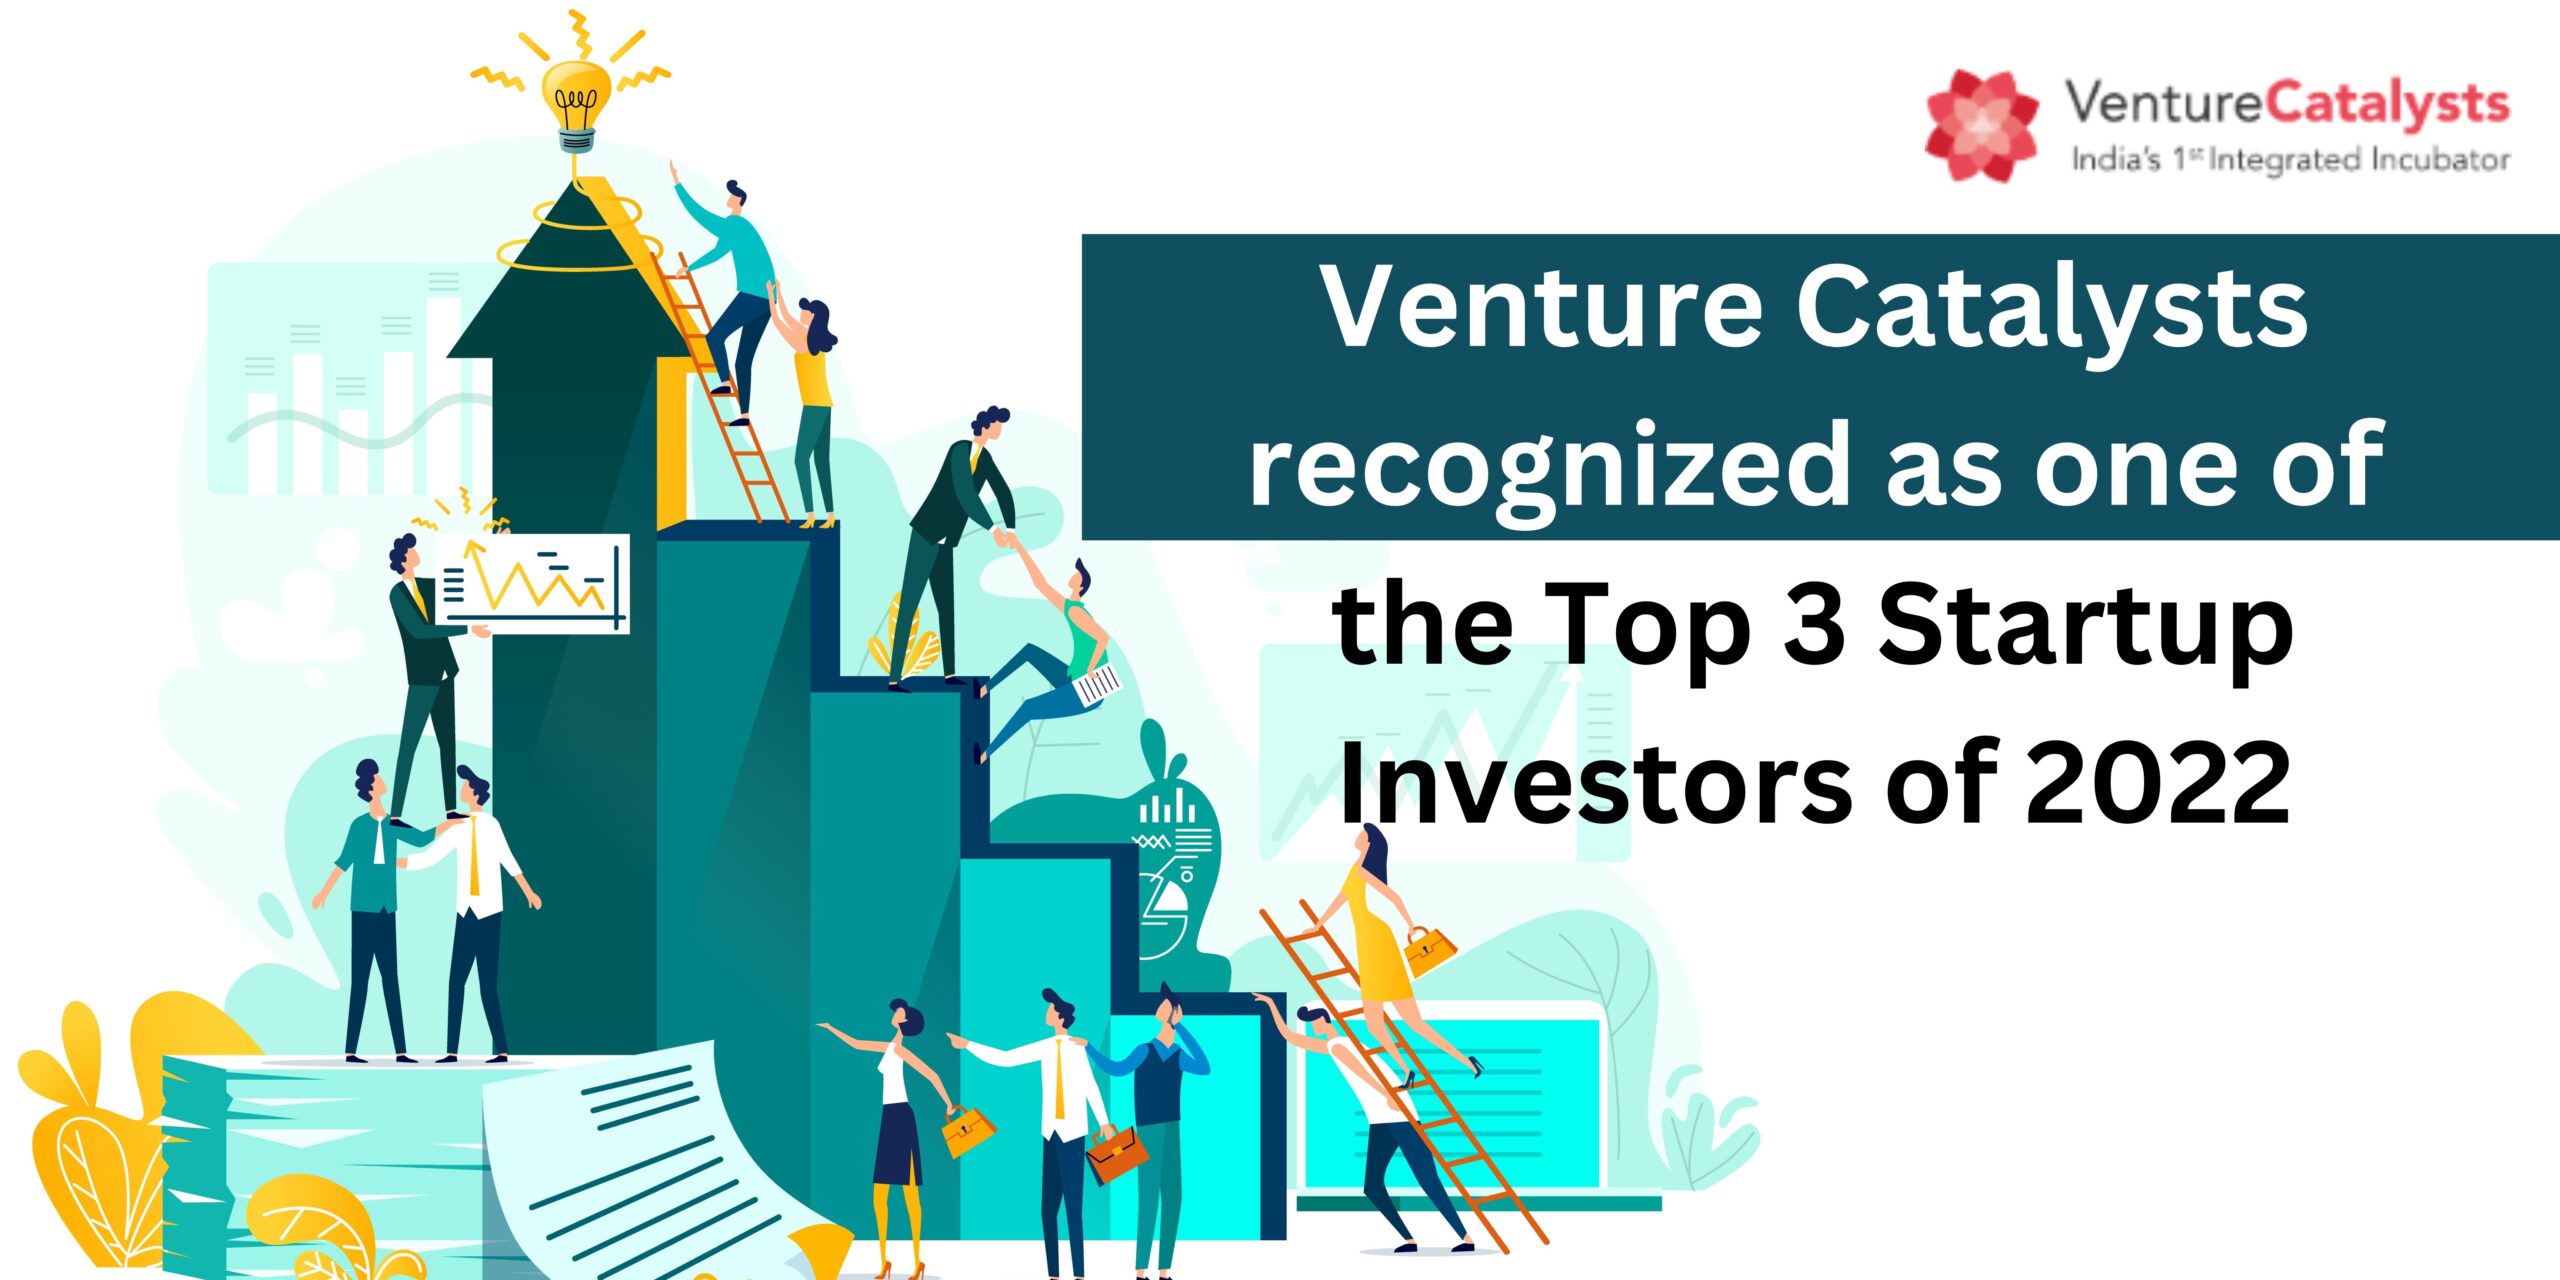 Venture Catalysts recognized as one of the Top 3 Startup Investors of 2022